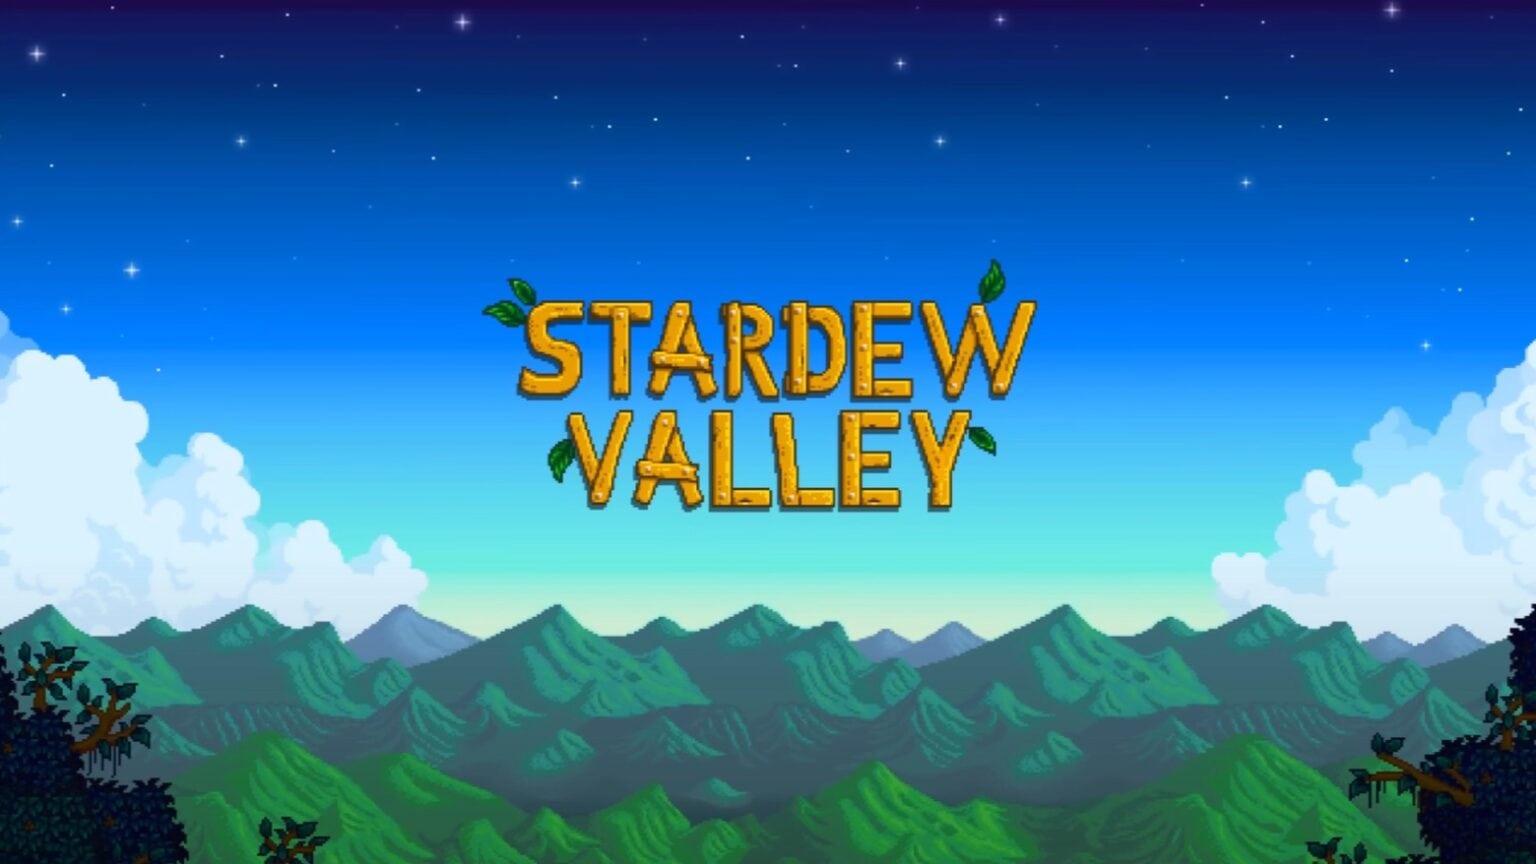 ‘Stardew Valley+’ is only one of the games coming soon to Apple Arcade.